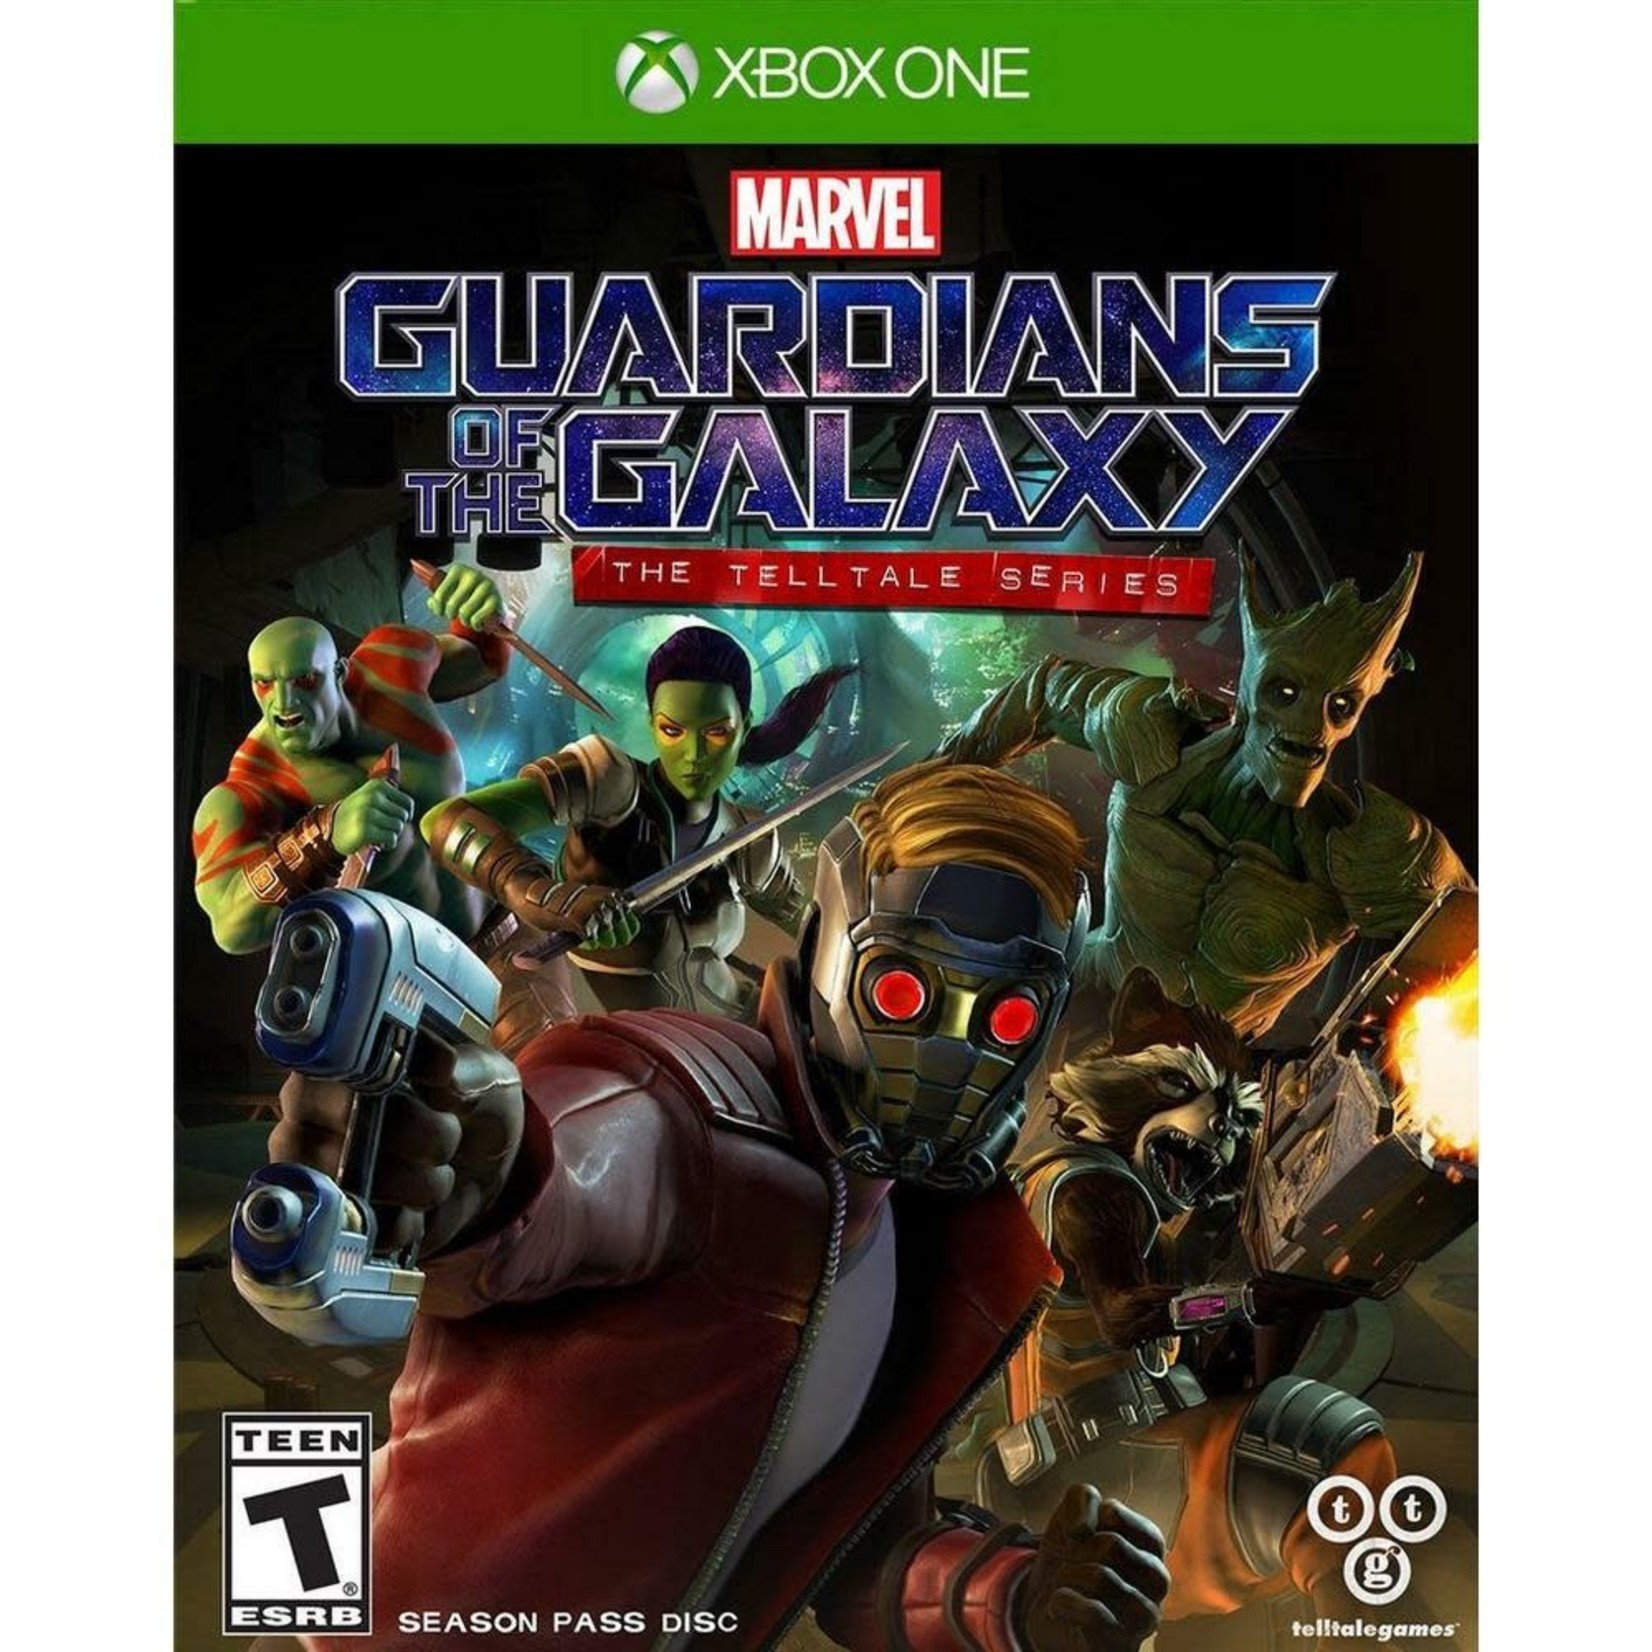 XB1-Marvel's Guardians of the Galaxy: The Telltale Series